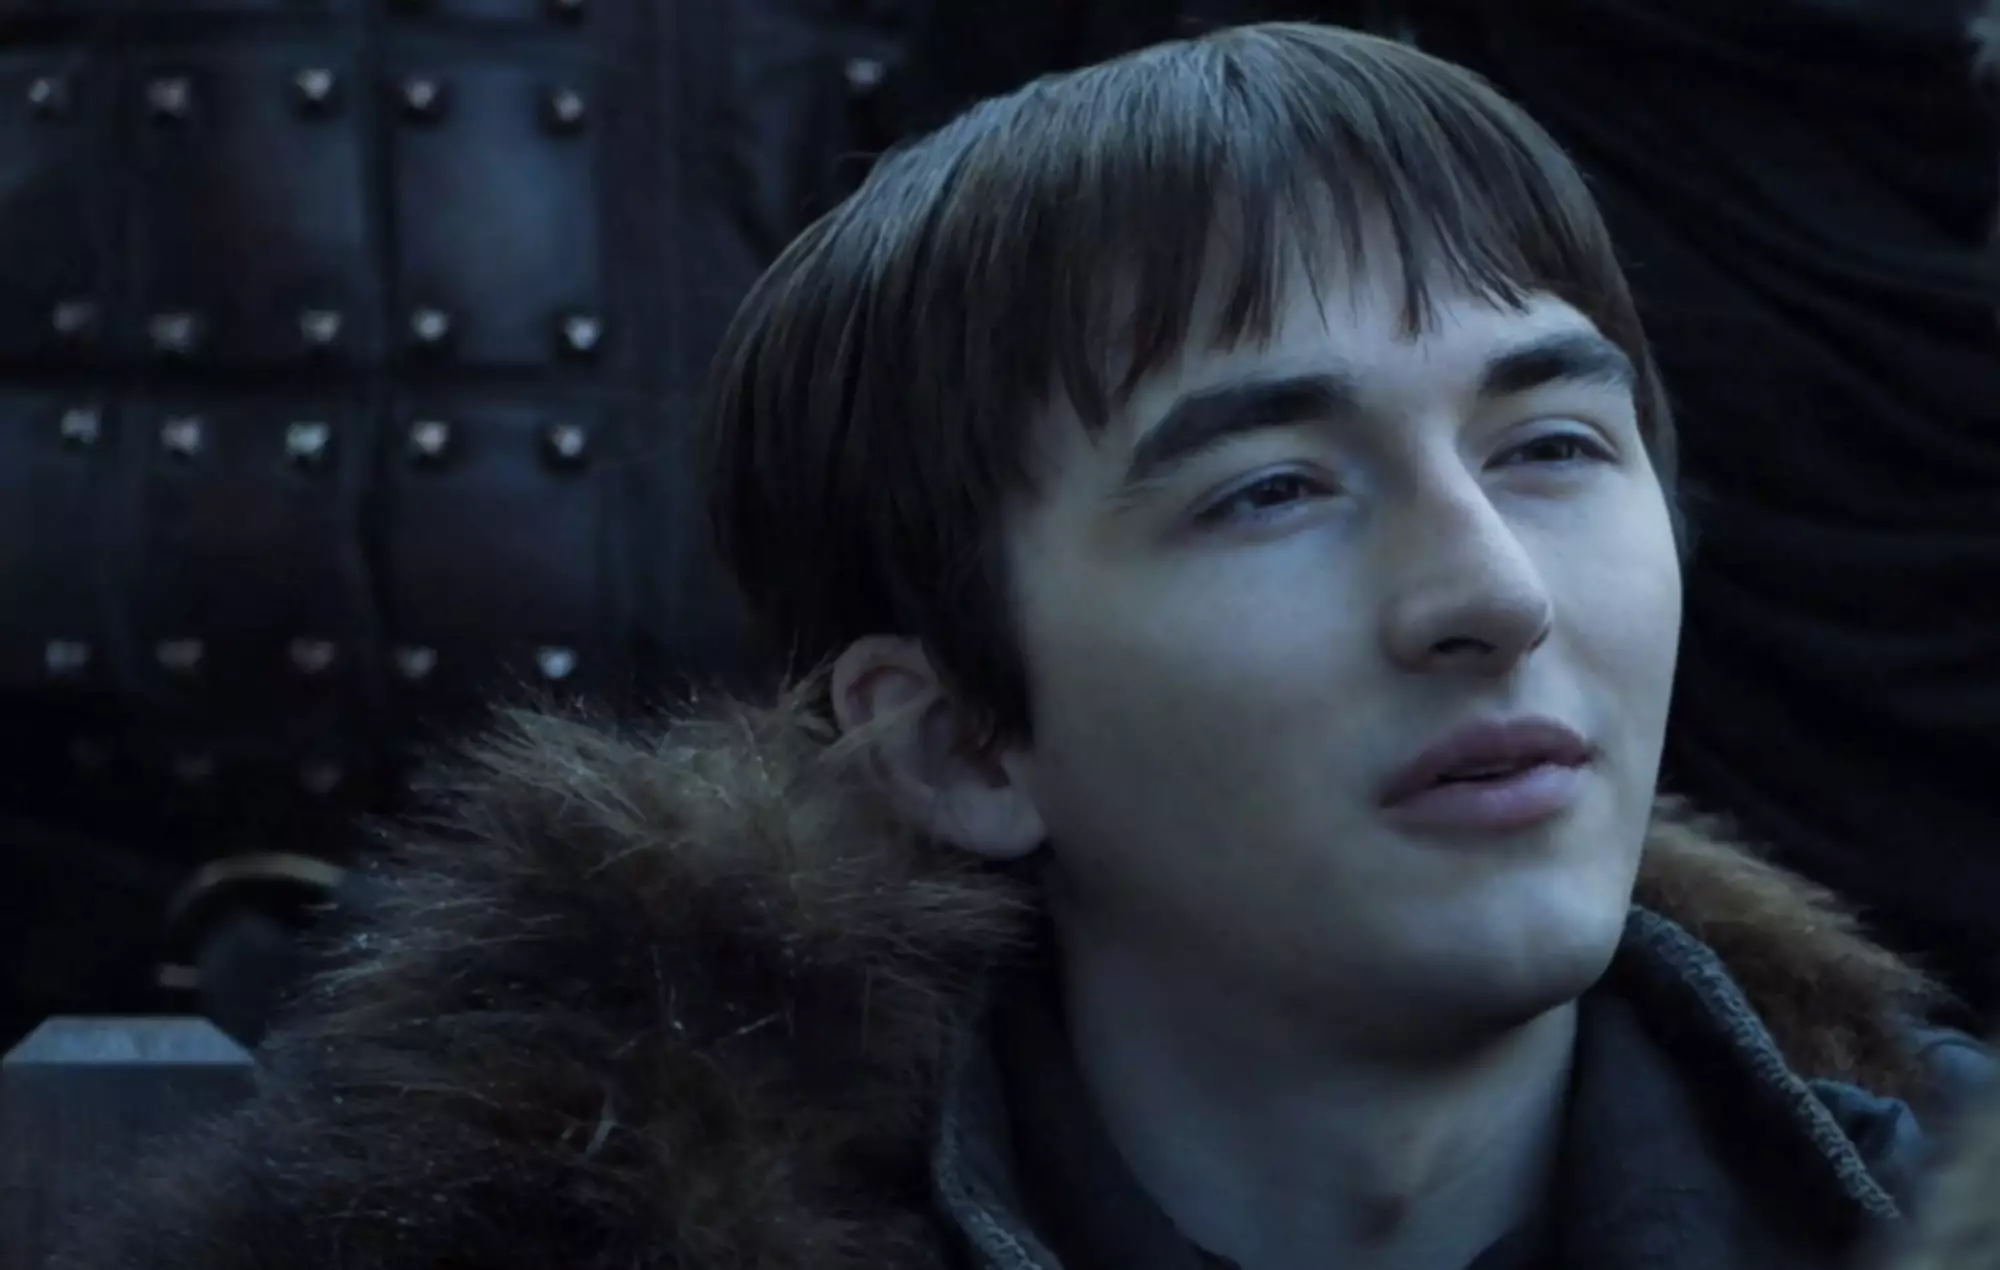 Come on, Bran.